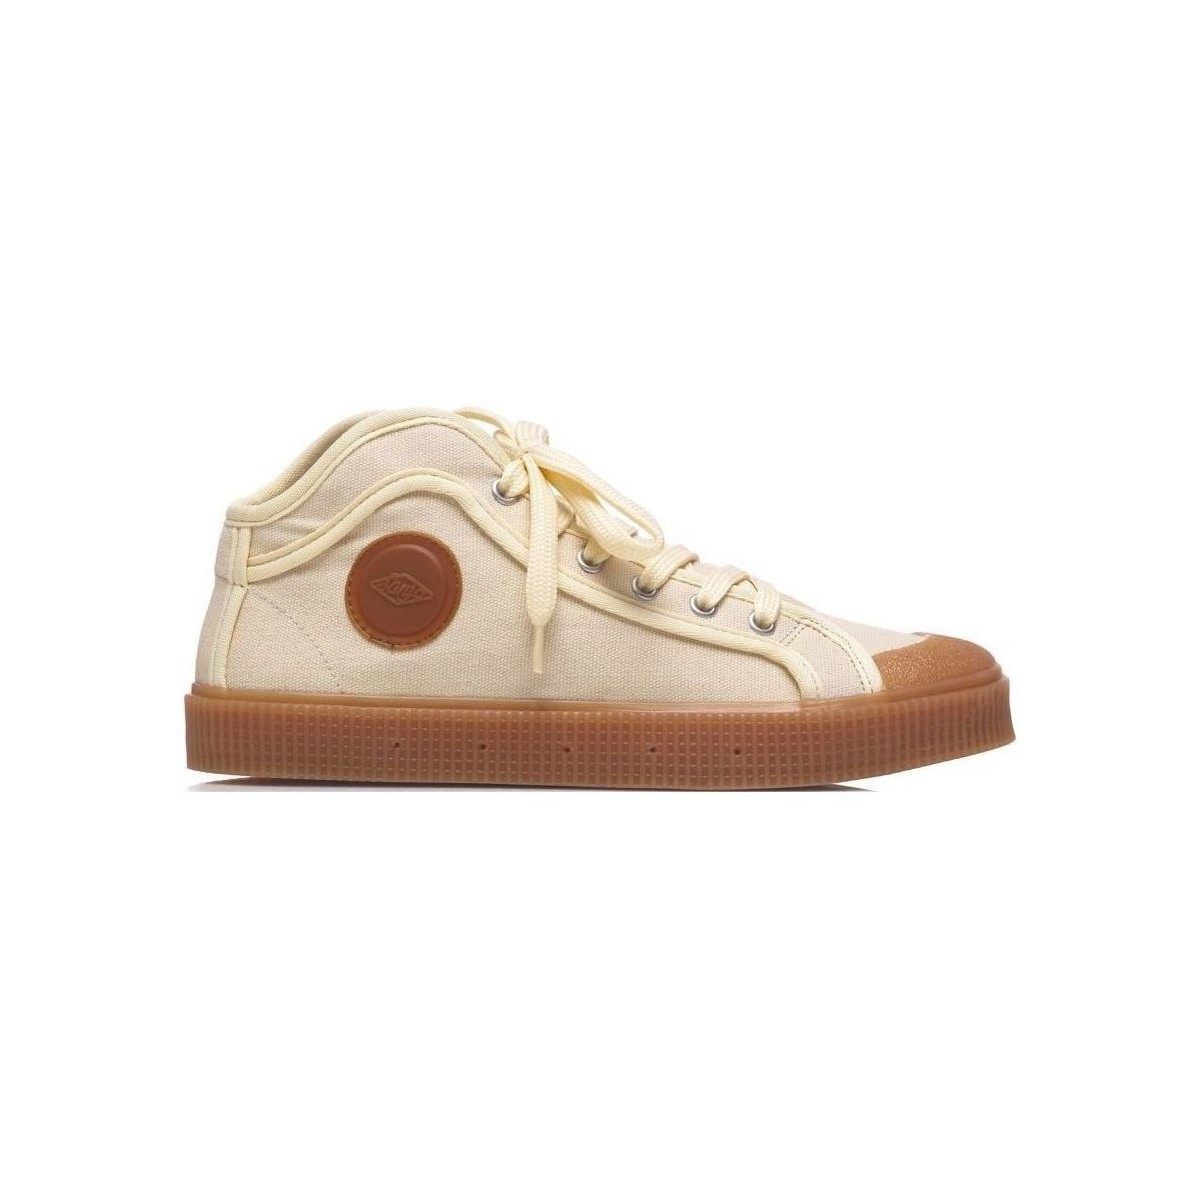 Chaussures Homme Baskets basses Sanjo K100 - Raw Caramel Multicolore